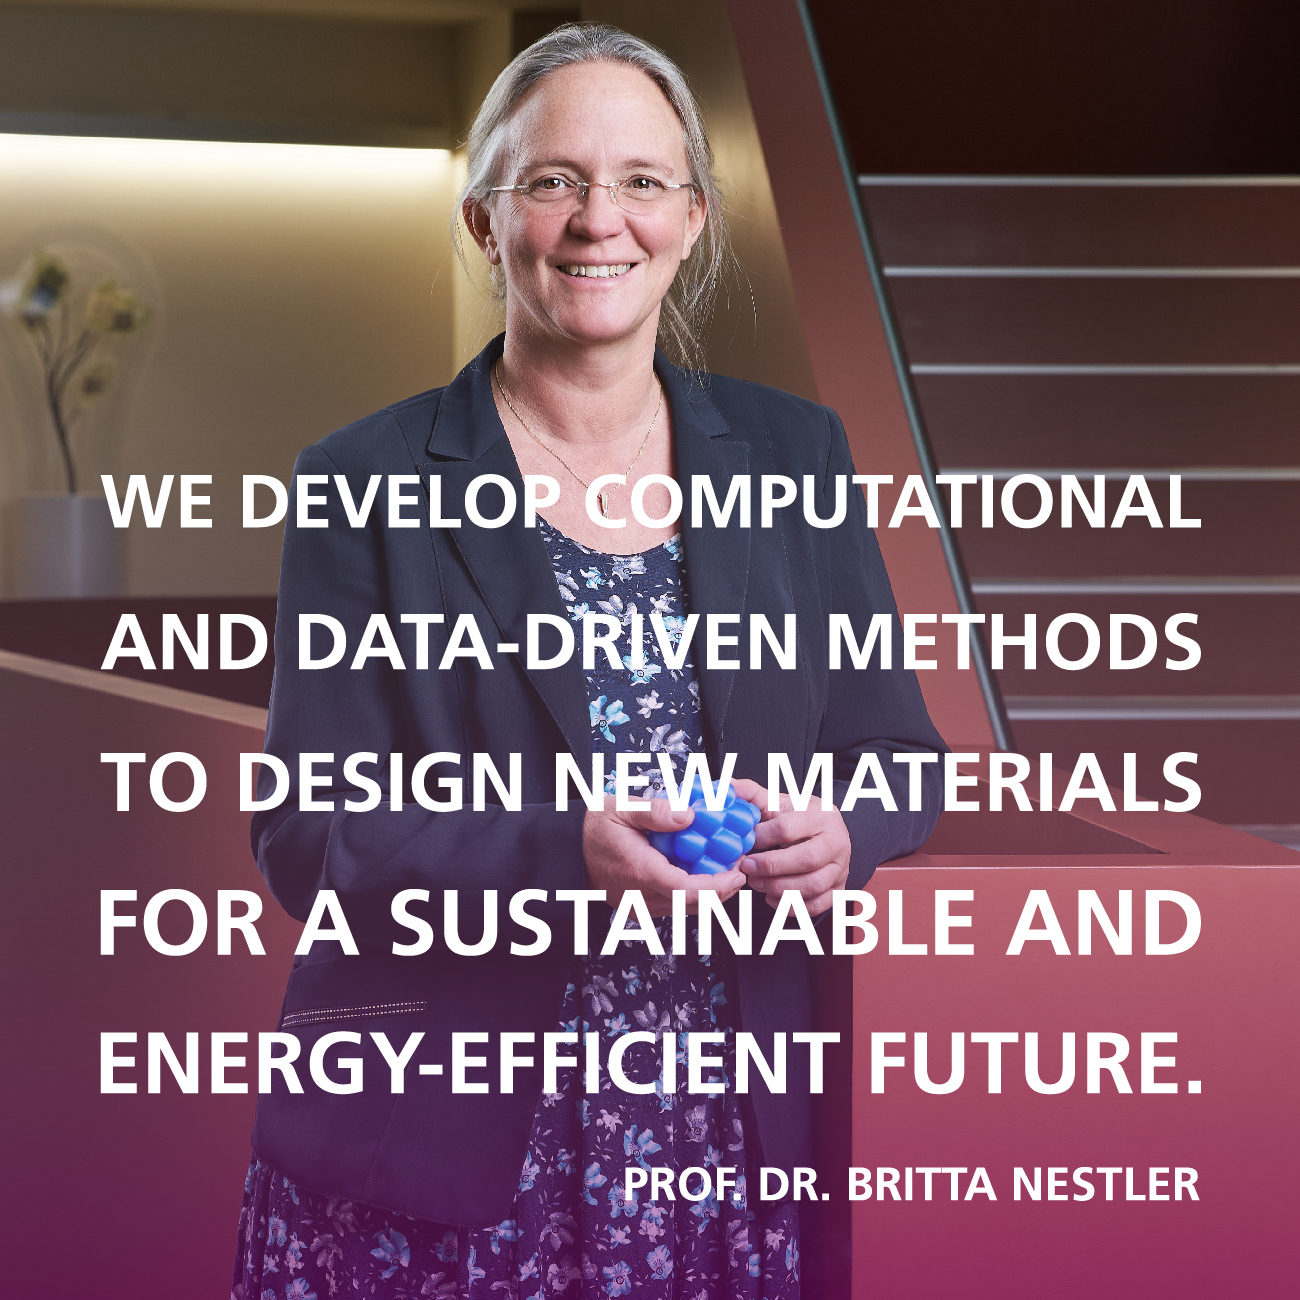 We develop computational and data-driven methods to design new materials for a sustainable and energy-efficient future. Quote by Prof. Dr. Britta Nestler, Division 3, KIT